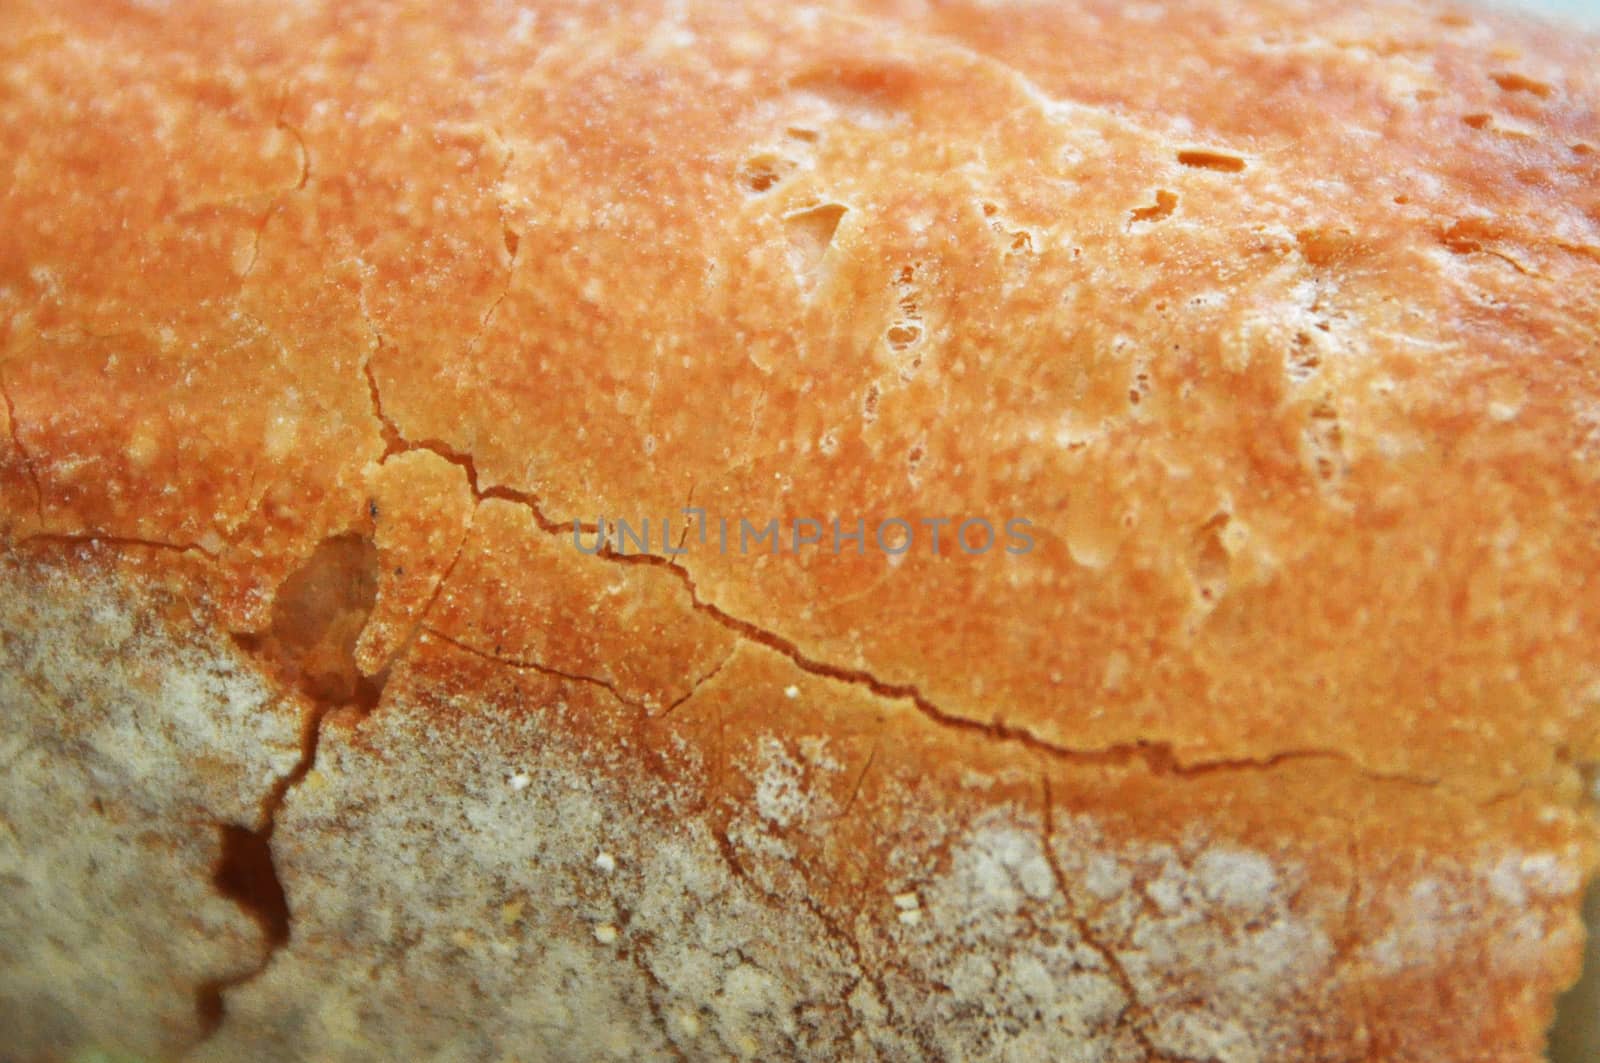 texture crust of hard bread in detail